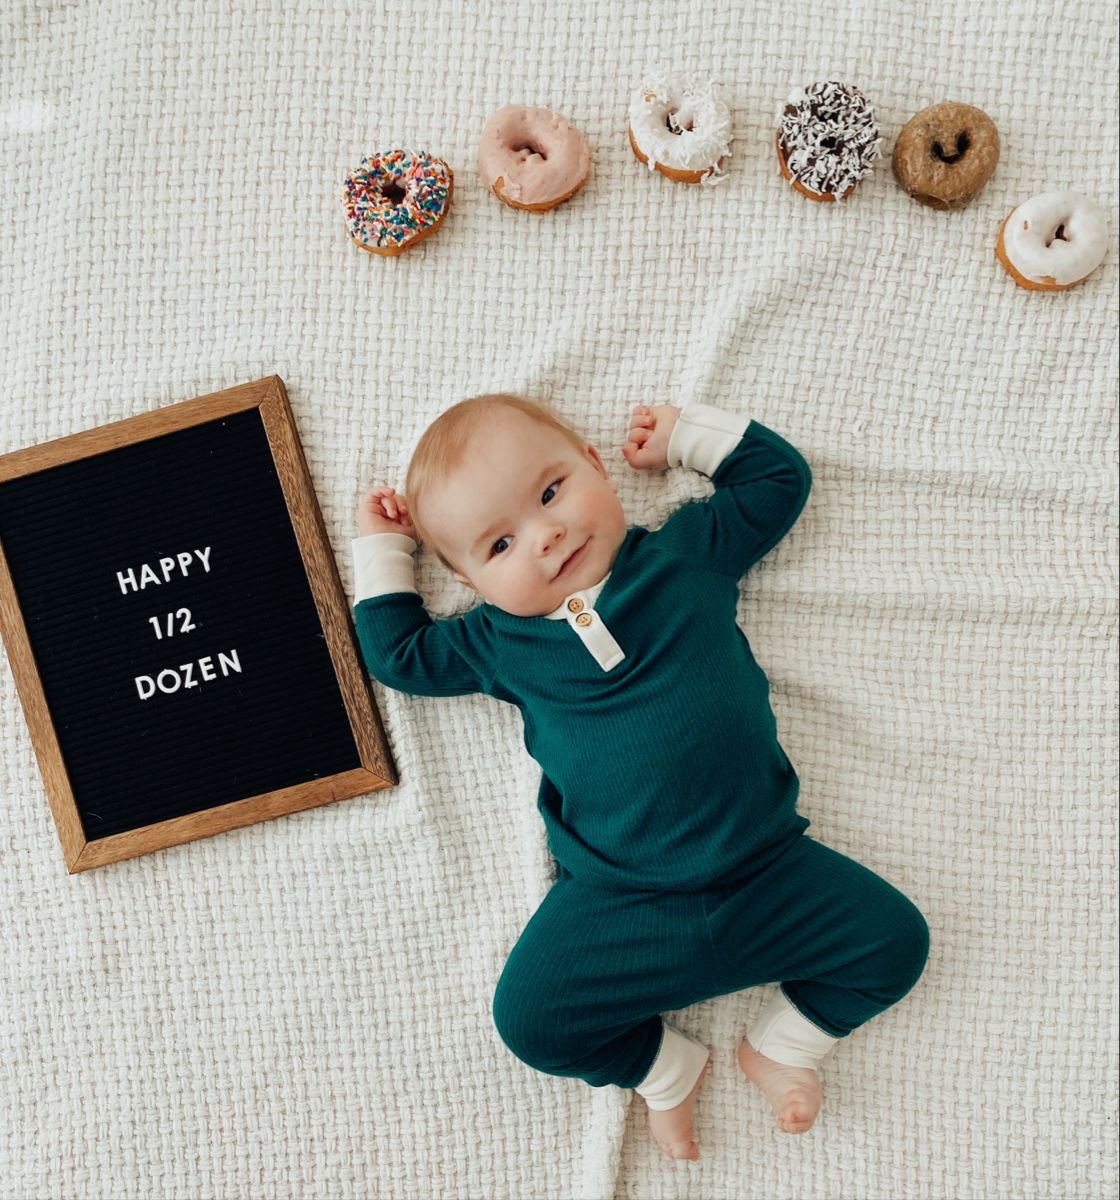 6-month birthday decoration ideas at home 2023